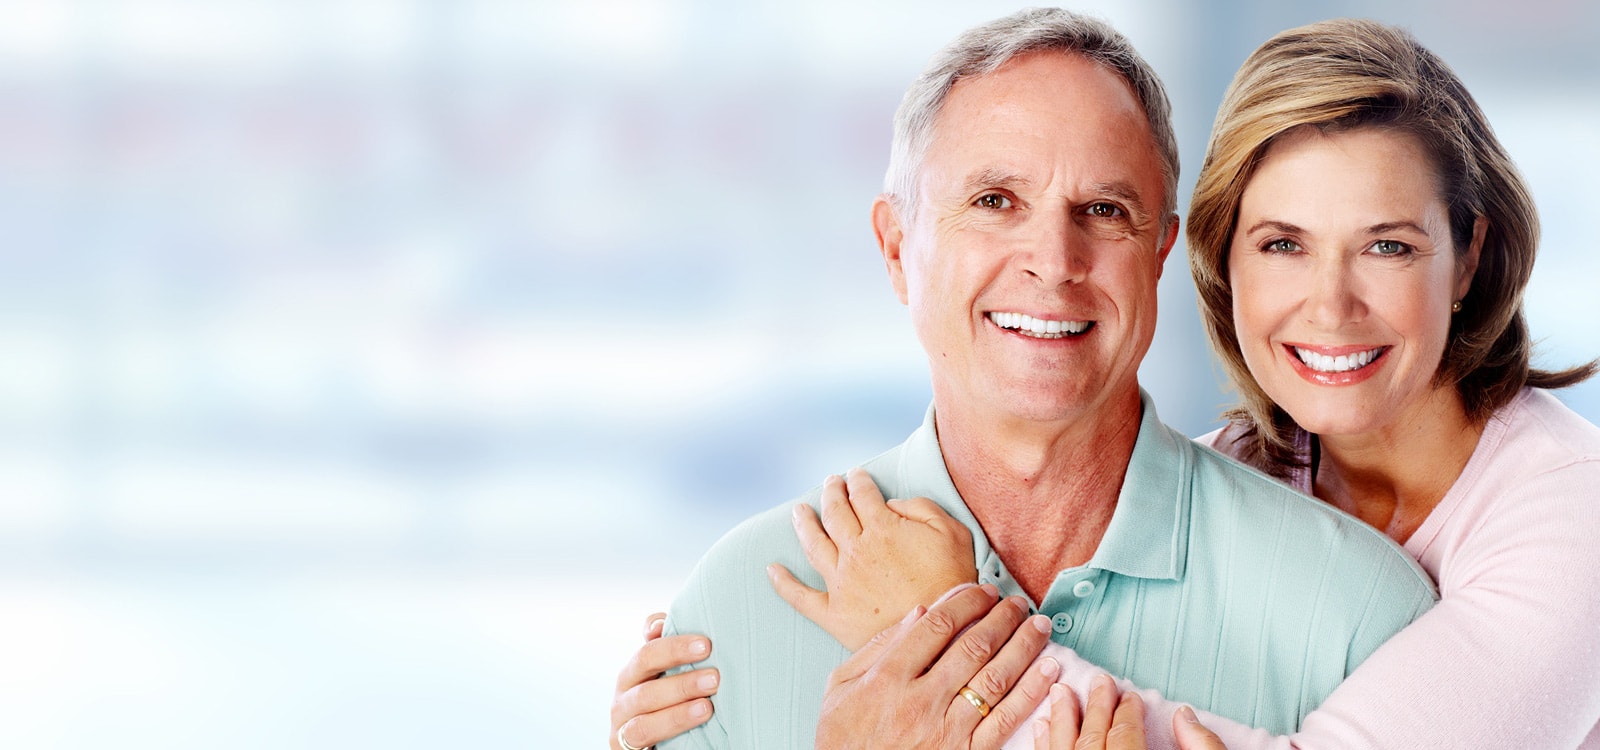 We are the experts of dental implants in Sydney.